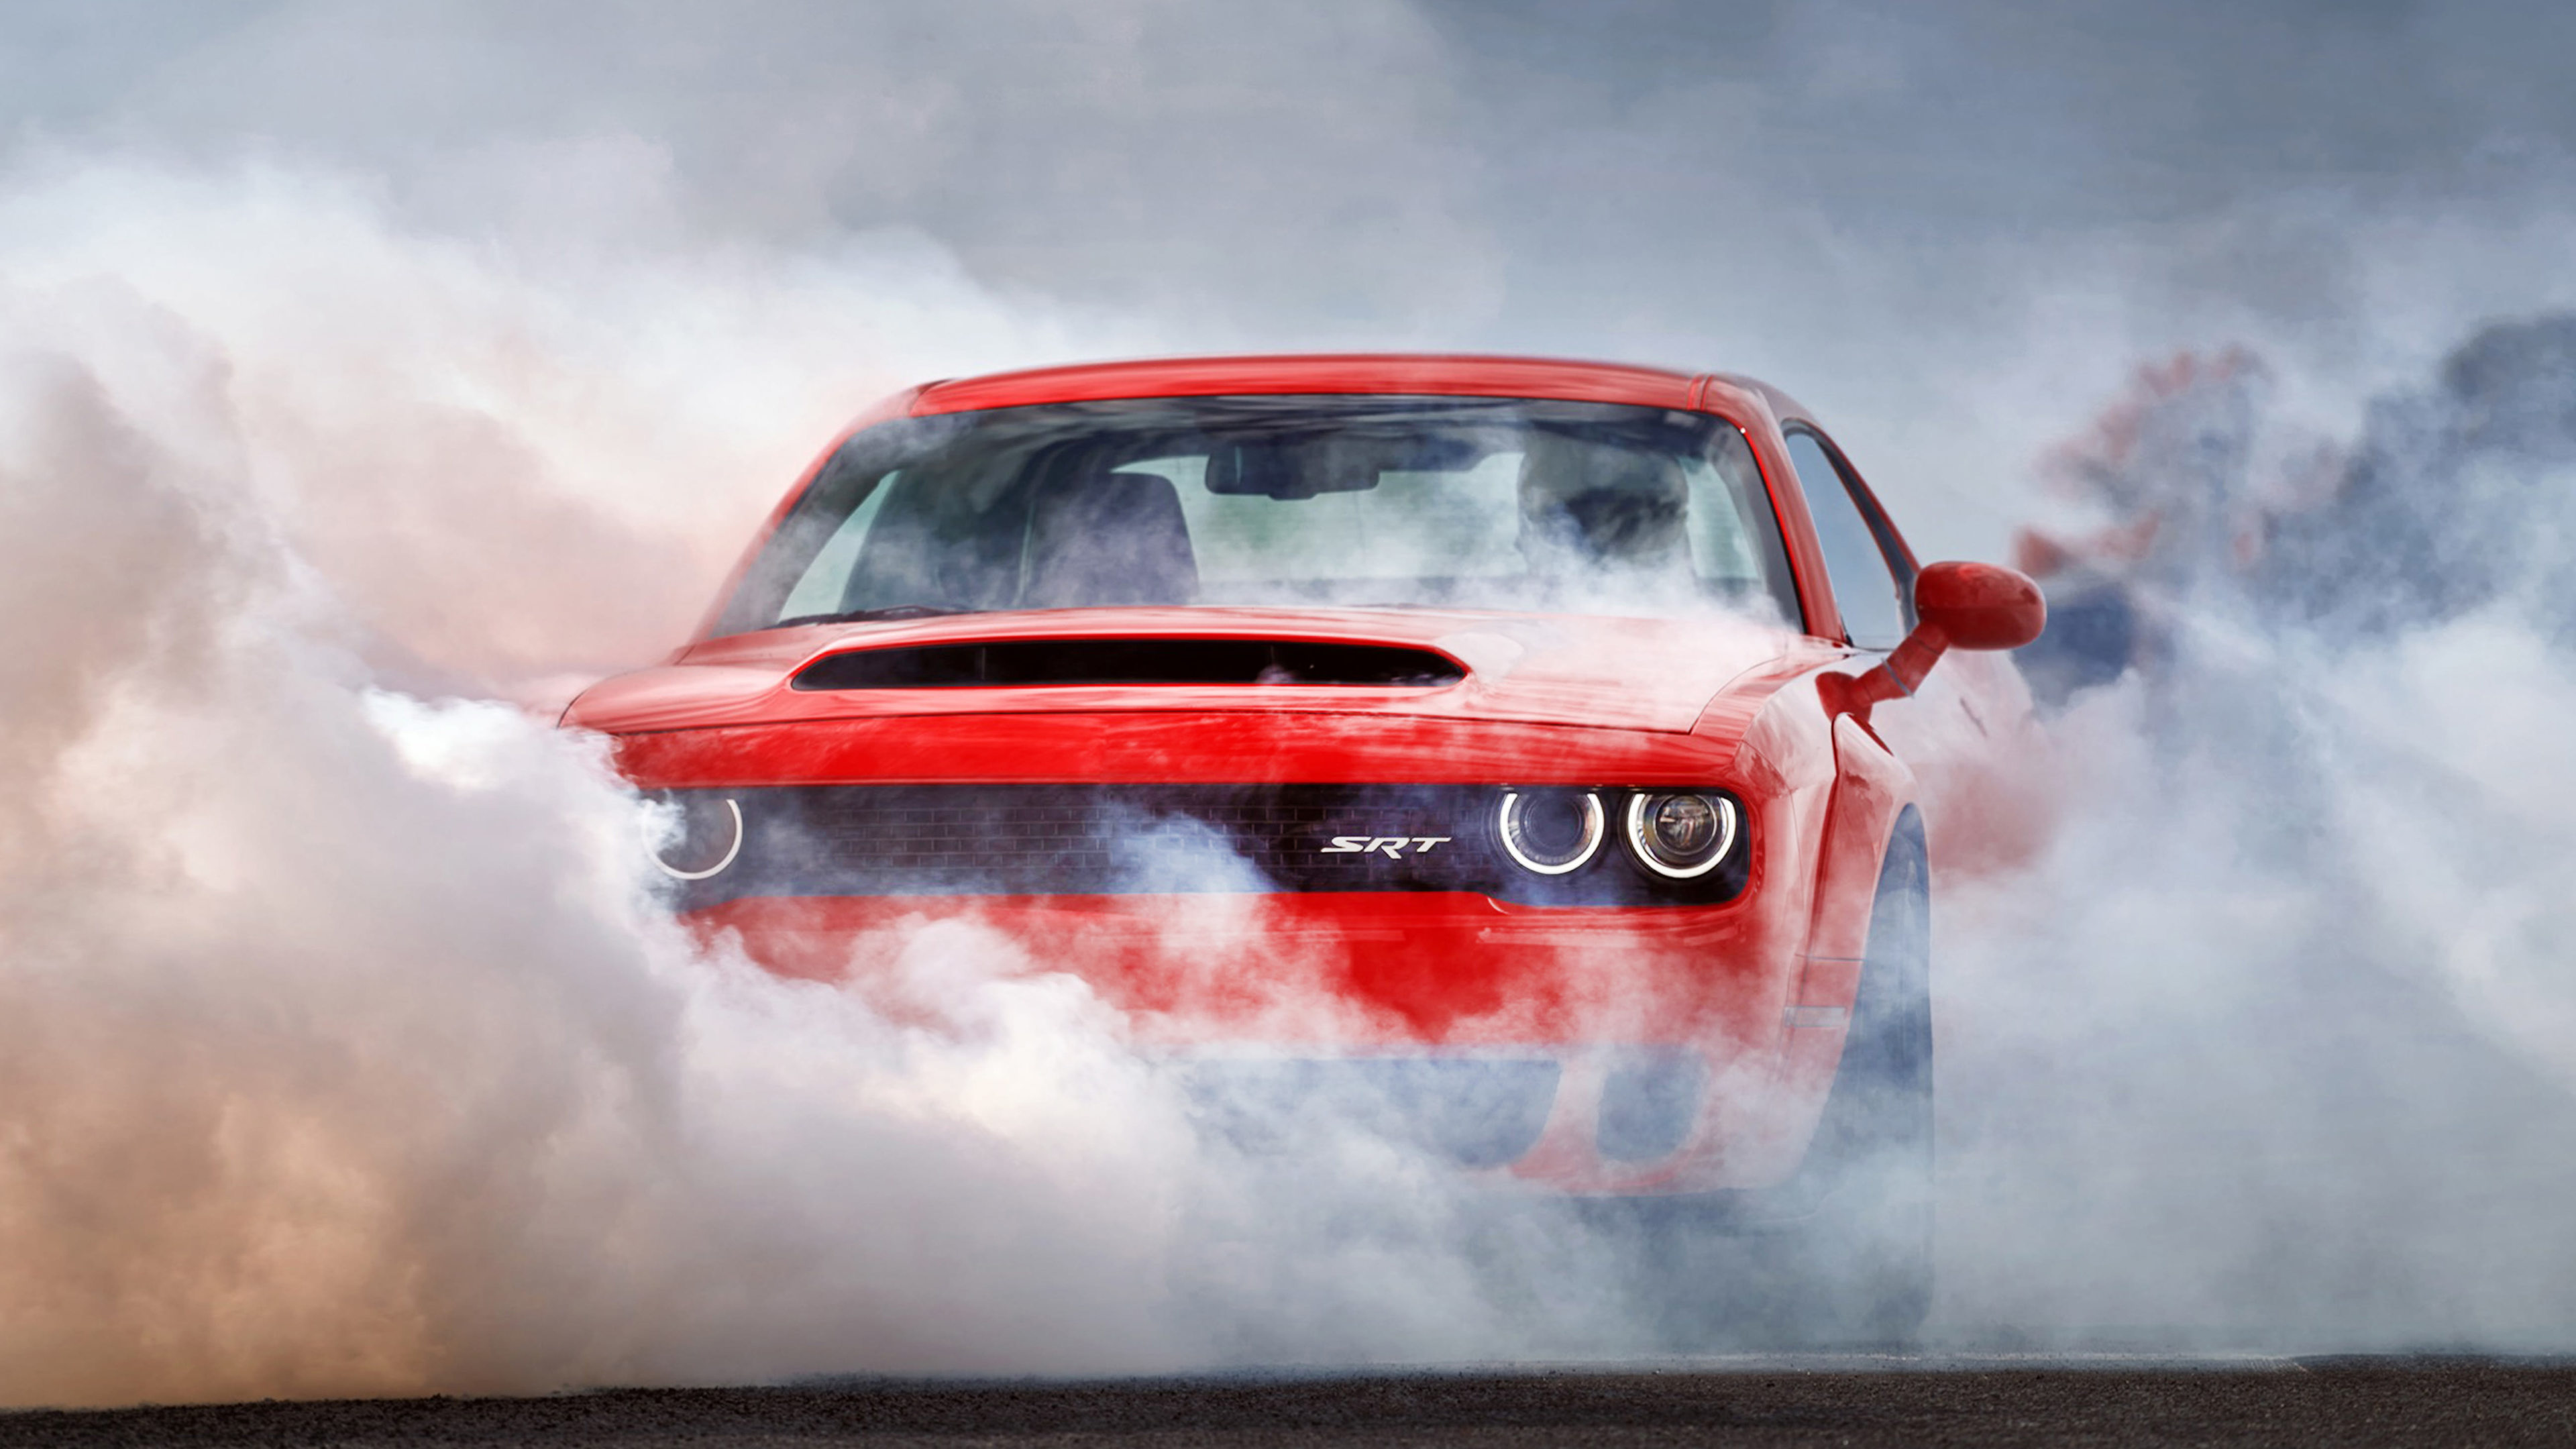 Red Dodge Challenger hd-wallpapers, dodge challenger wallpapers, cars